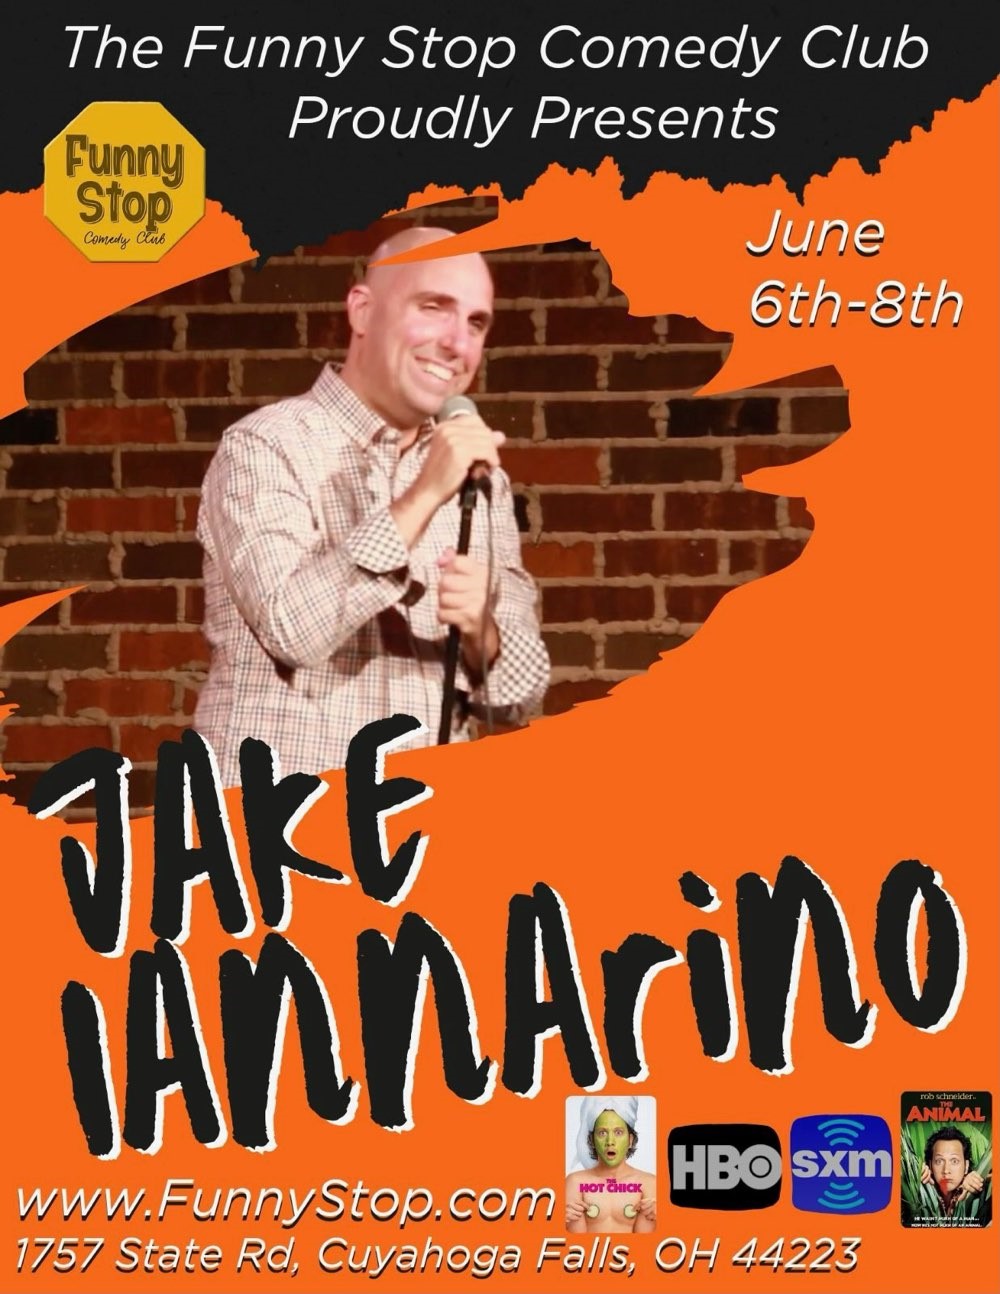 Jake Iannarino - Sat. 9:30PM Show Funny Stop Comedy Club on Jun 08, 21:30@Funny Stop Comedy Club - Buy tickets and Get information on Funny Stop funnystop.online